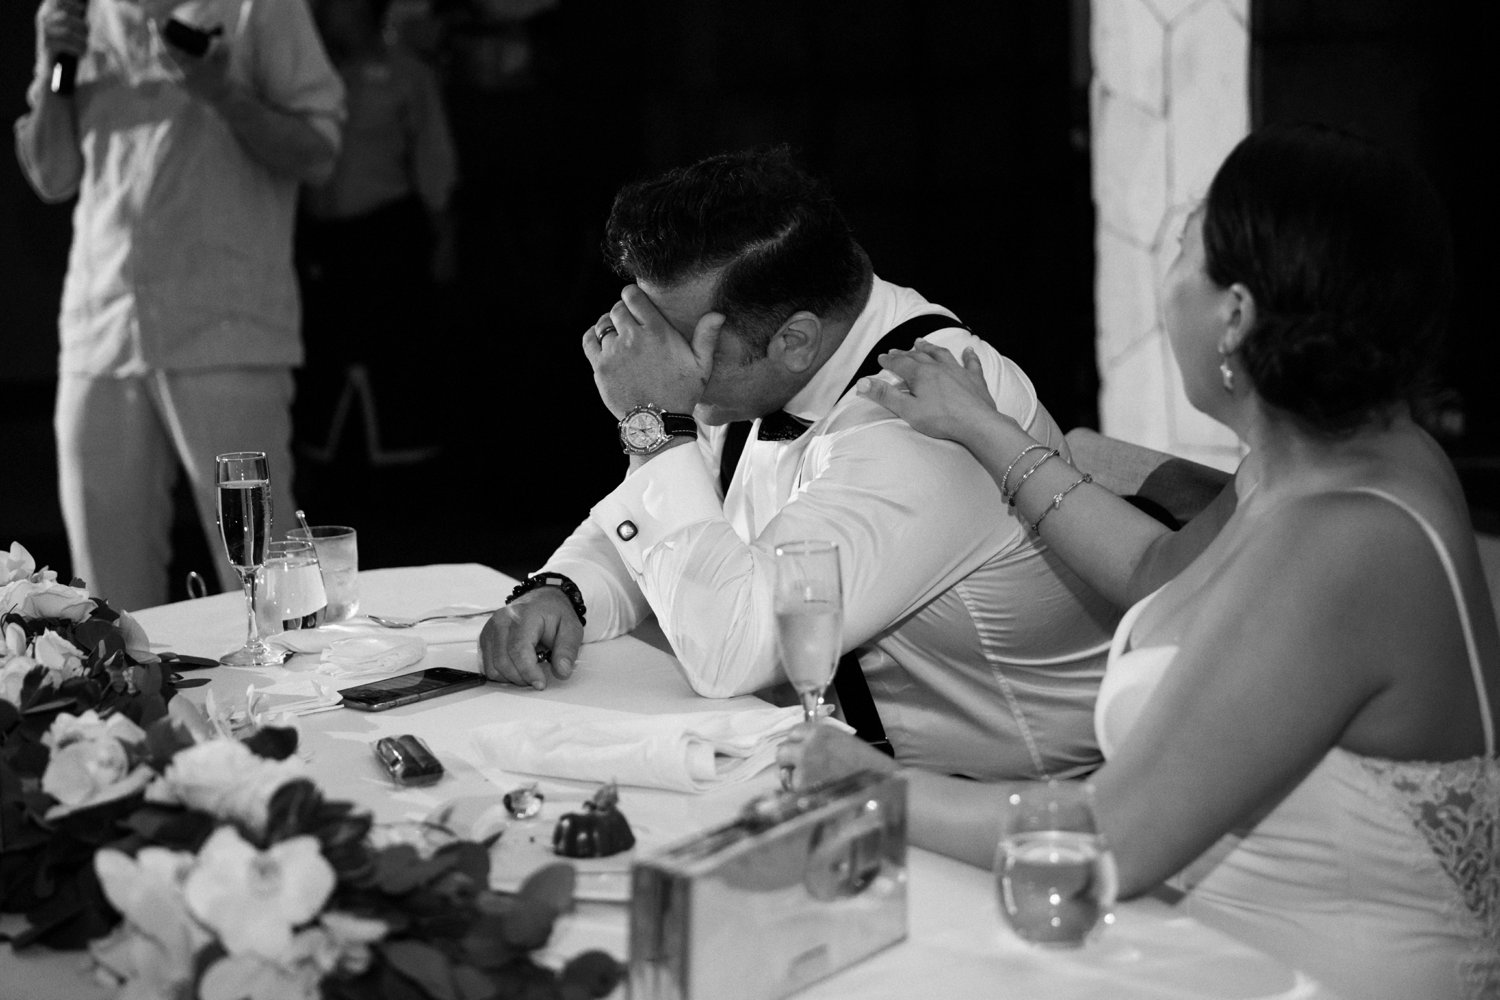  images by feliciathephotographer.com | destination wedding photographer | mexico | tropical | fiji | venue | azul beach resort | riviera maya | reception | black and white | bride and groom head table | tearing up | best man speech | toasts | champagne | 